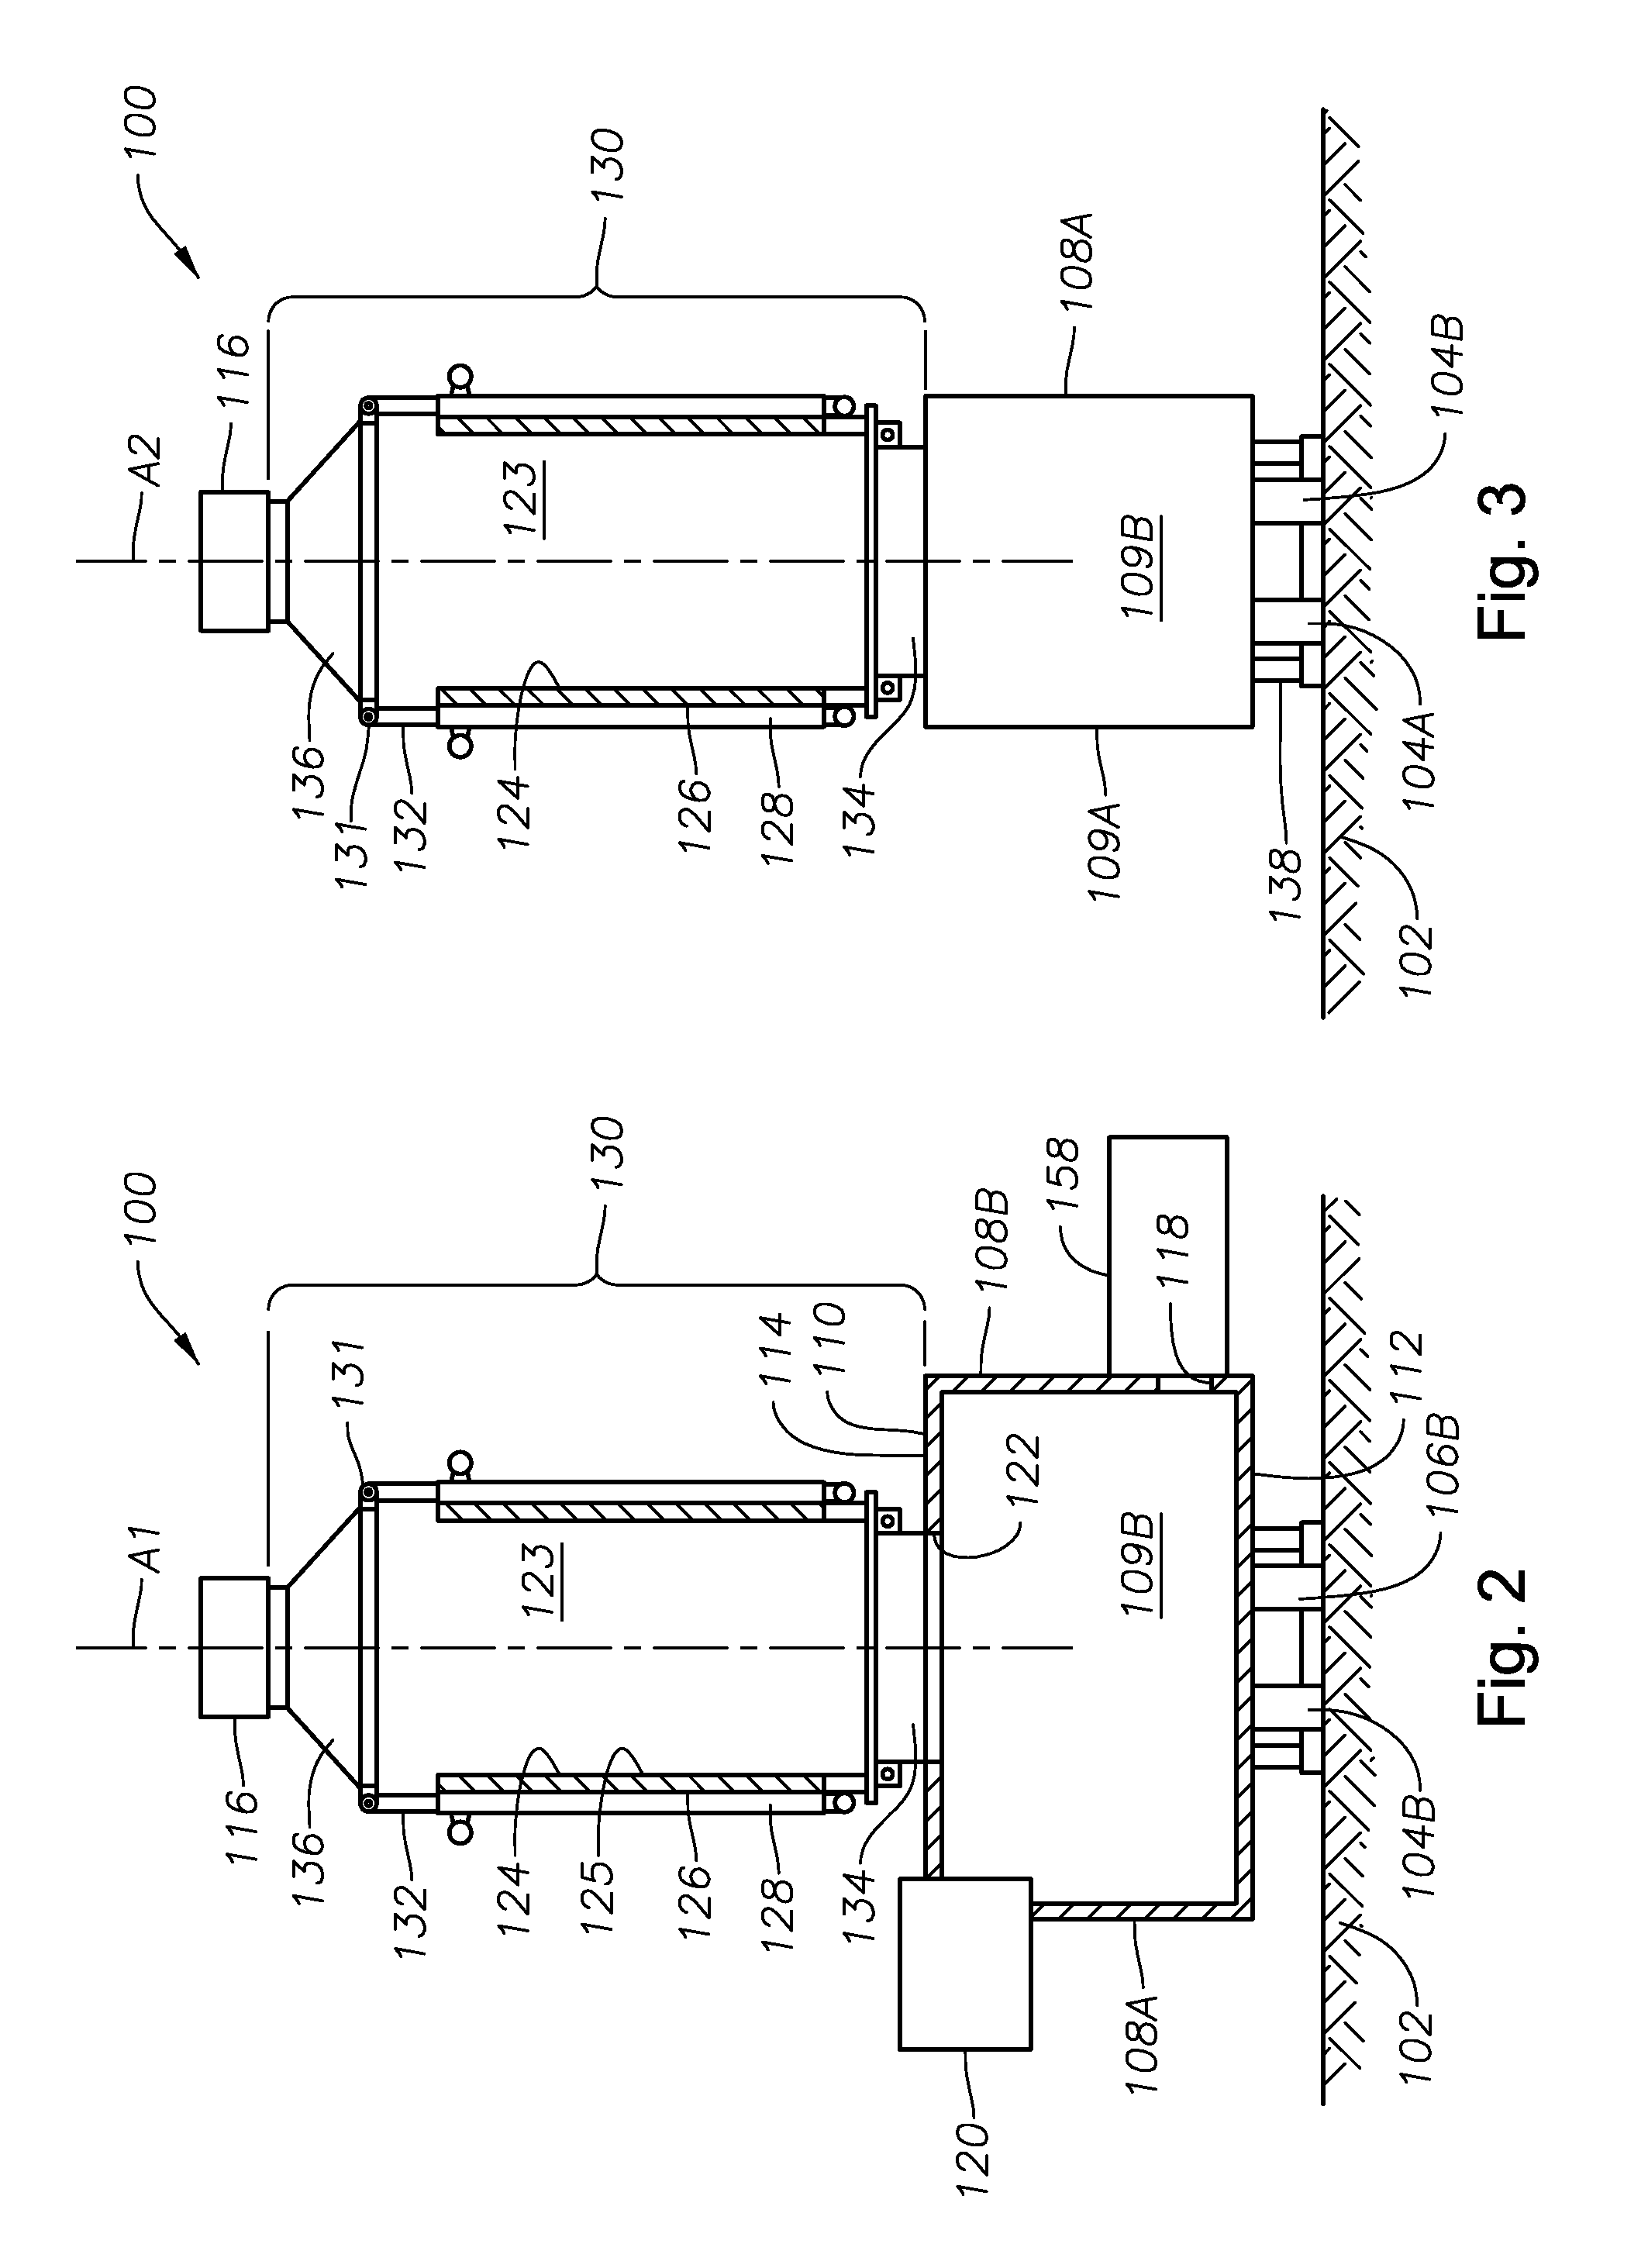 Submerged combustion glass manufacturing systems and methods